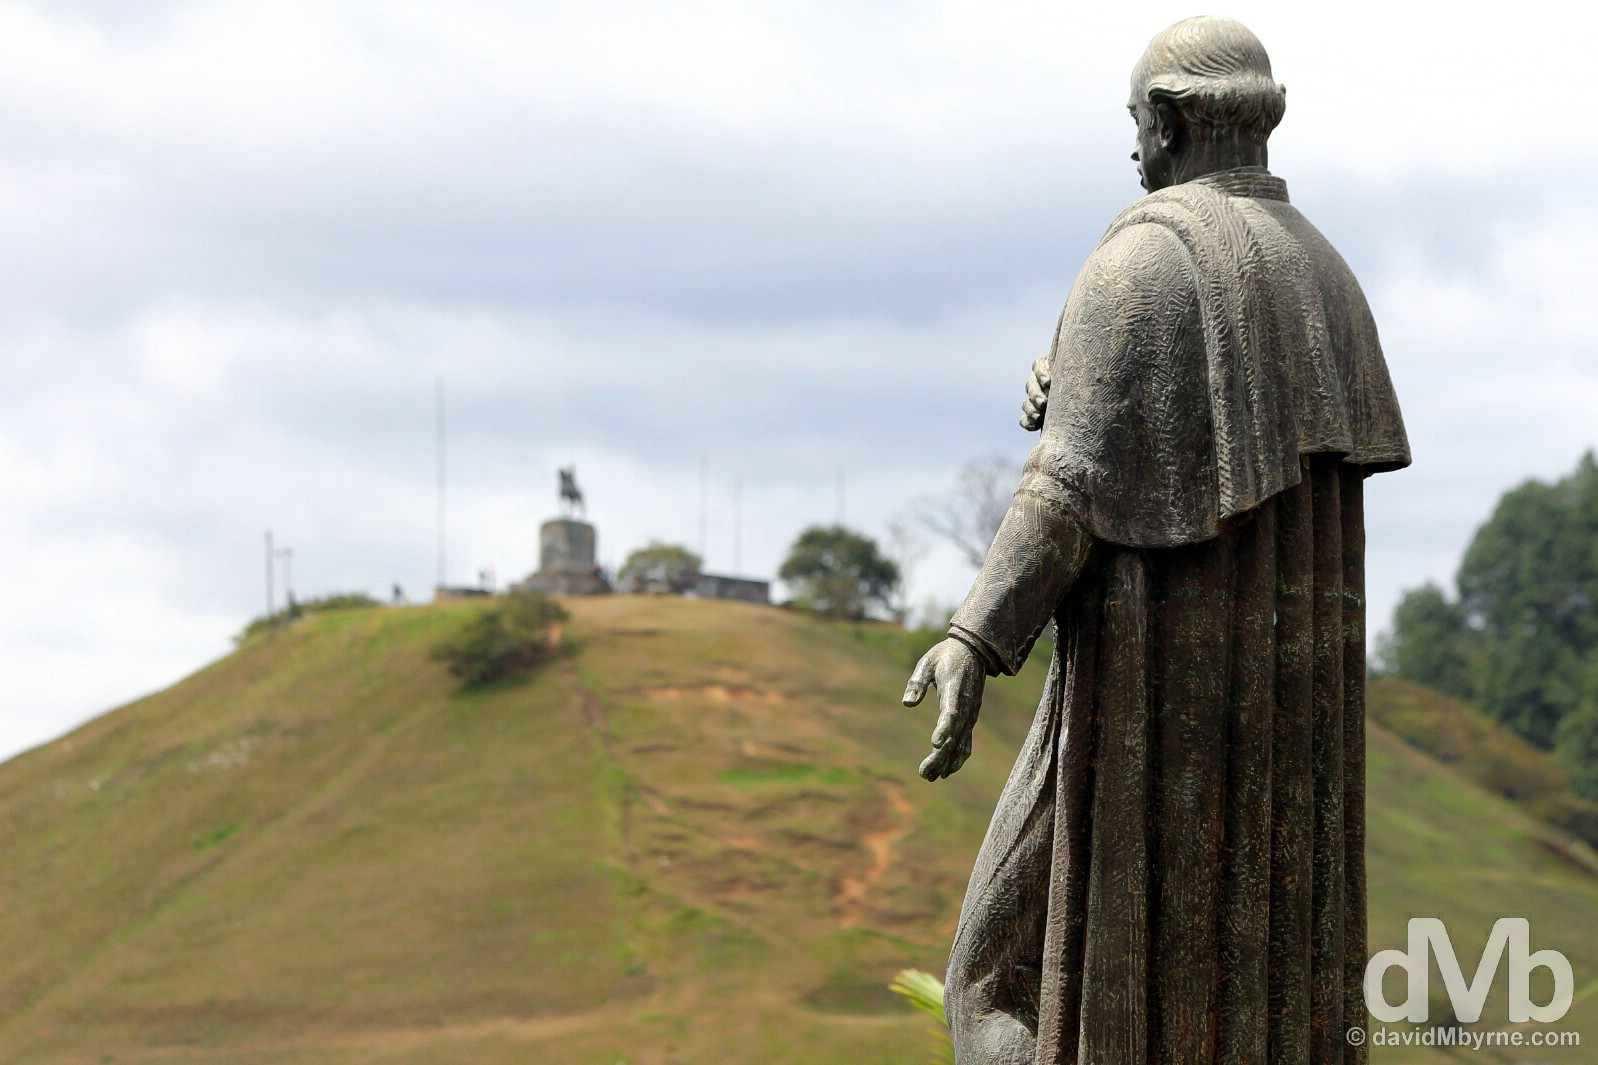 A statue of Guillermo Valencia in the grounds of the Museo Guillermo Valencia with the city lookout of El Morro de Tulcan in the distance. Popayan, Colombia. June 30, 2015.